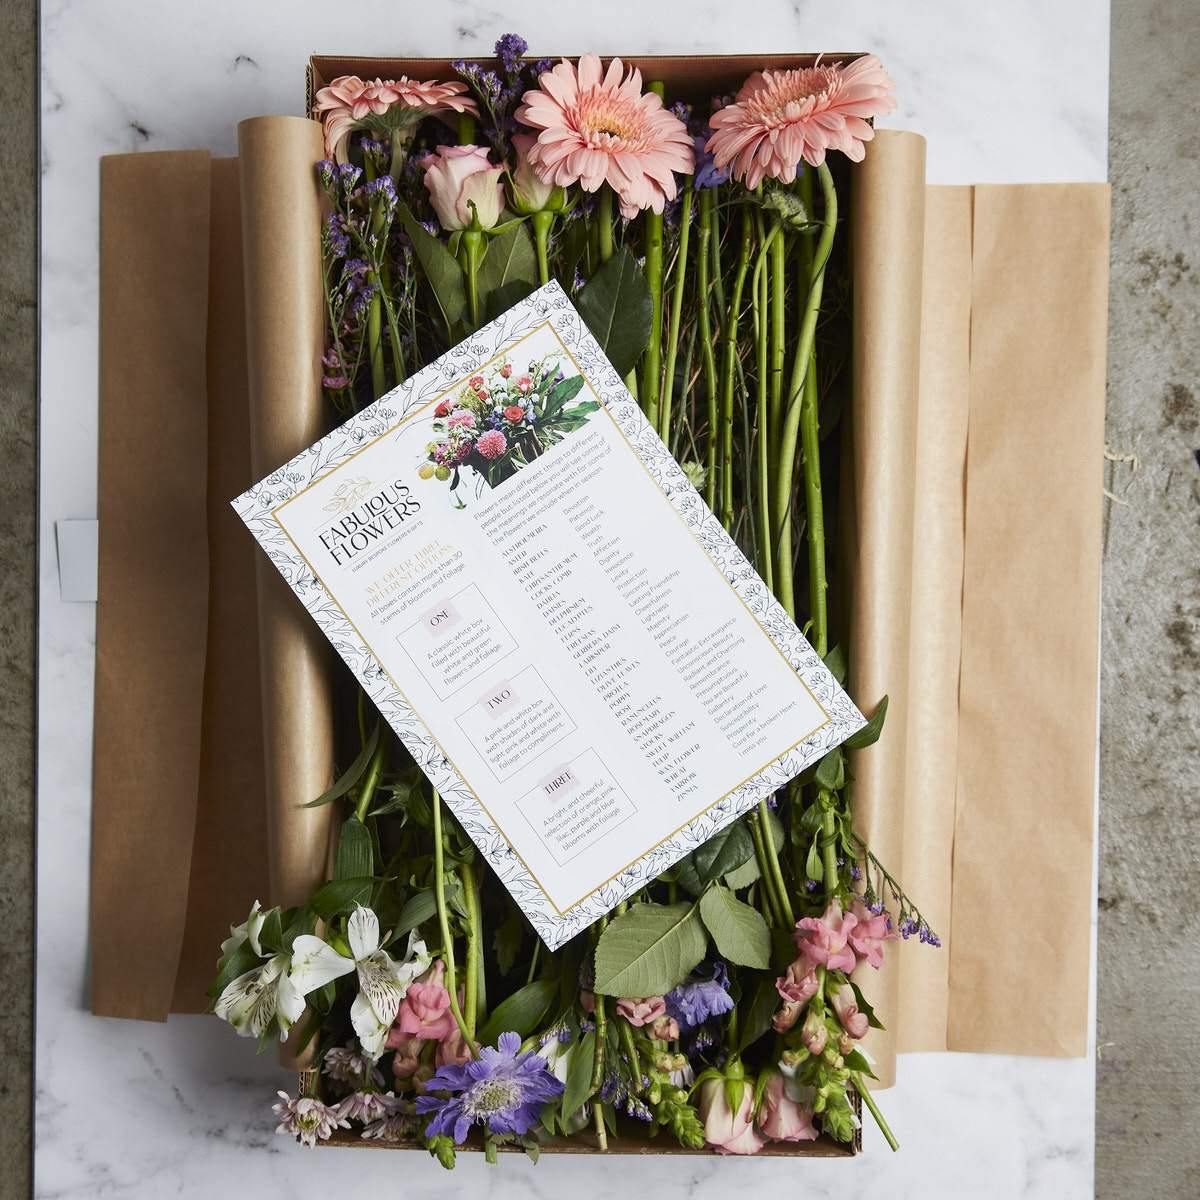 Pink & Lilac Flowers in a Box - Fabulous Flowers Cape Town Flower Delivery